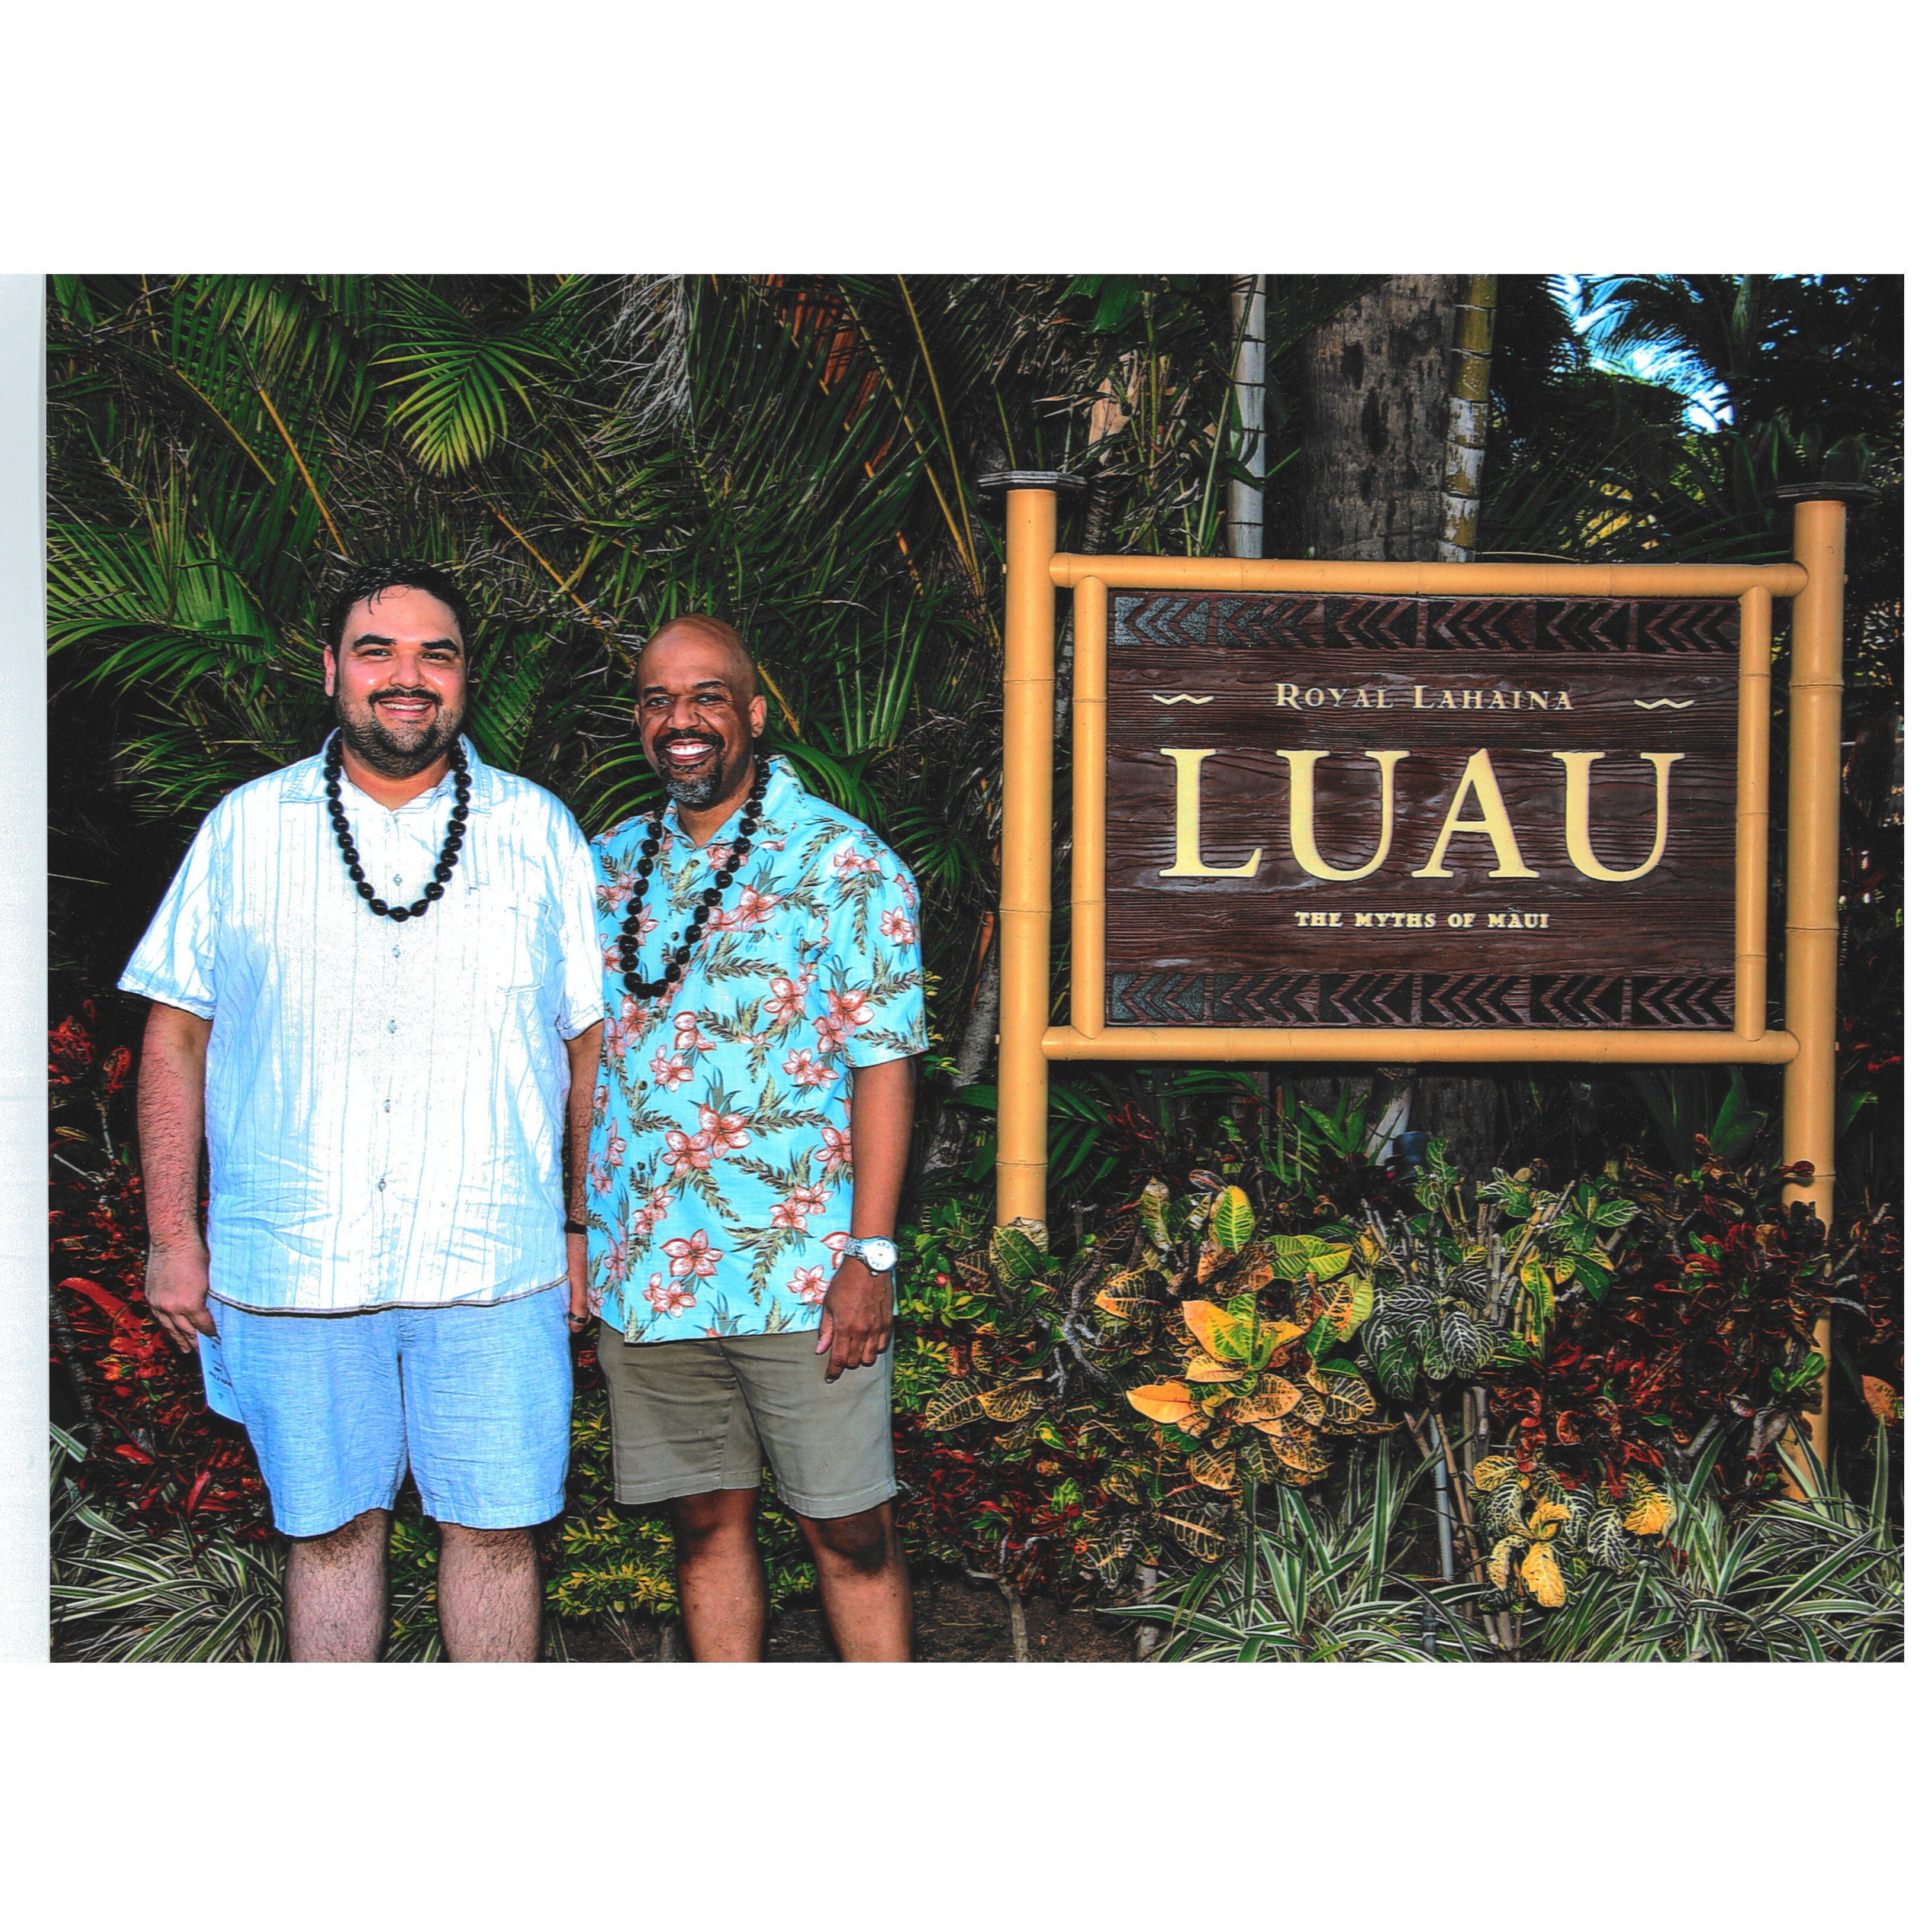 We visited Maui together a few years ago and it made such an impression we decided to get married here. We went to a luau and enjoyed great food and entertainment.